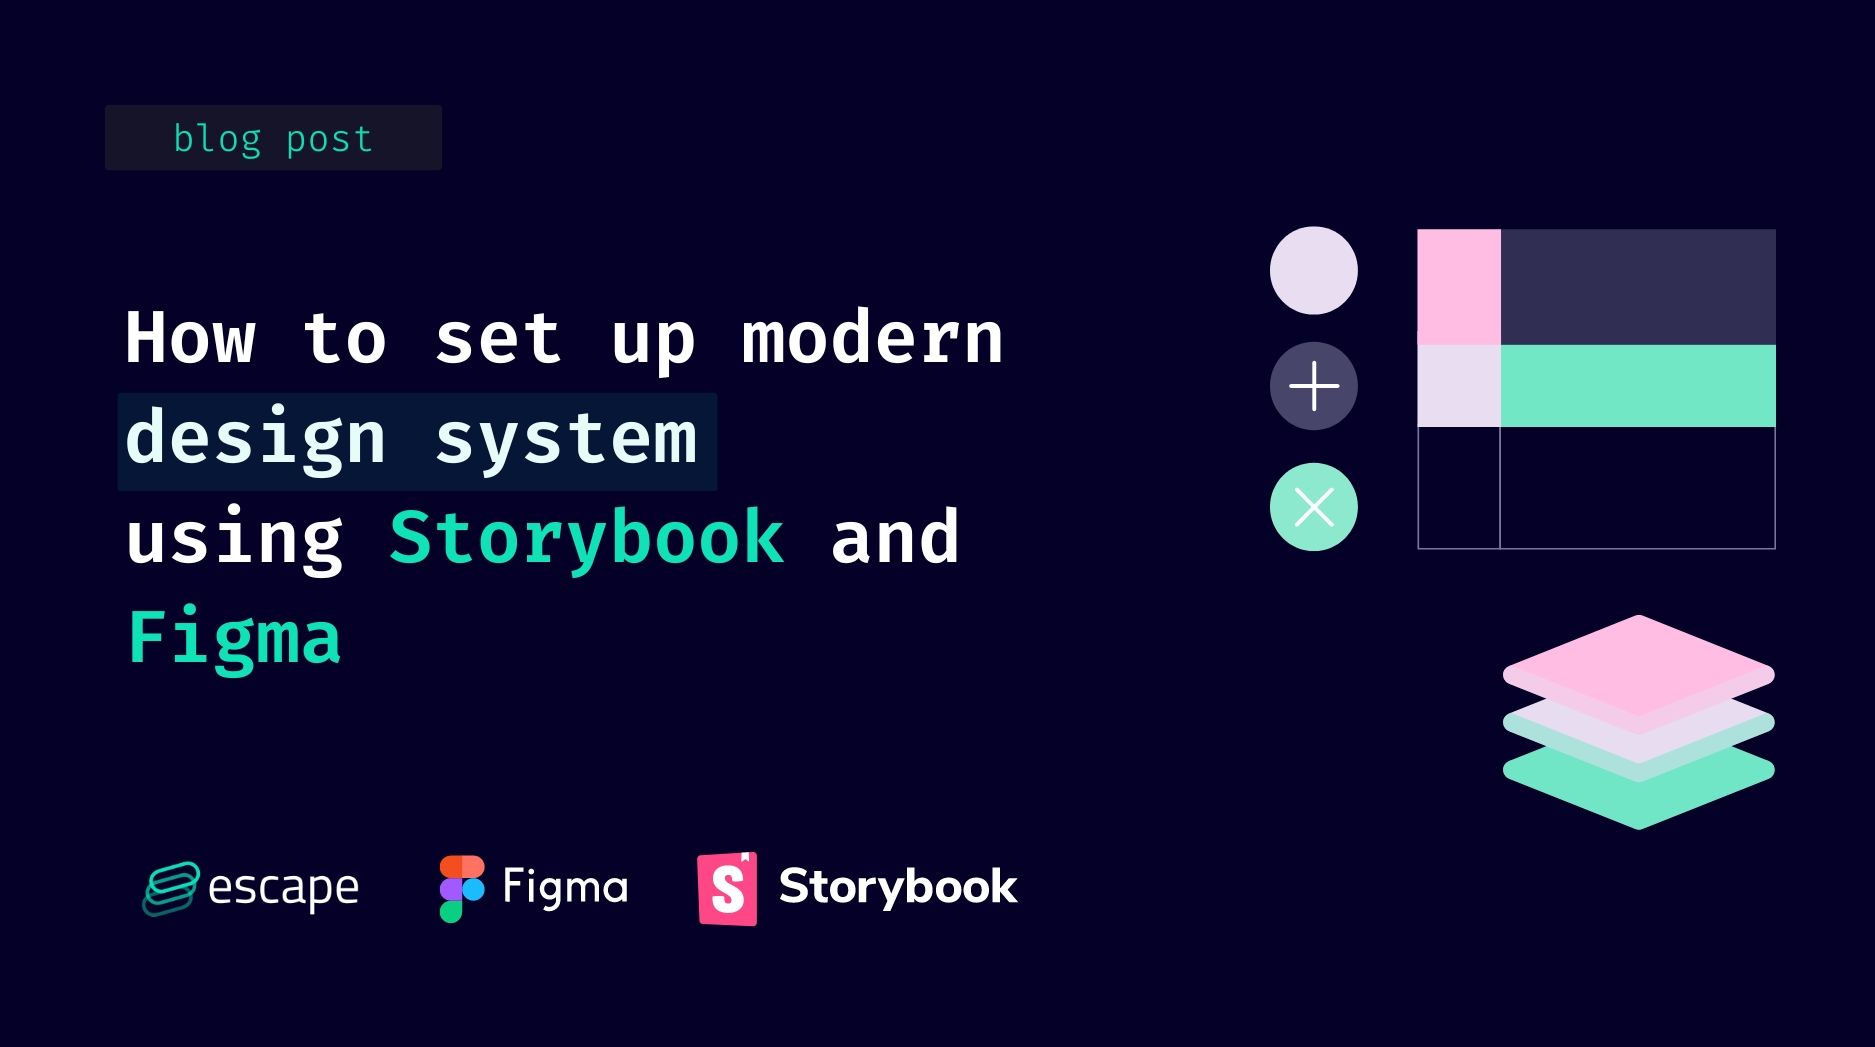 How to set up modern design system using Storybook and Figma